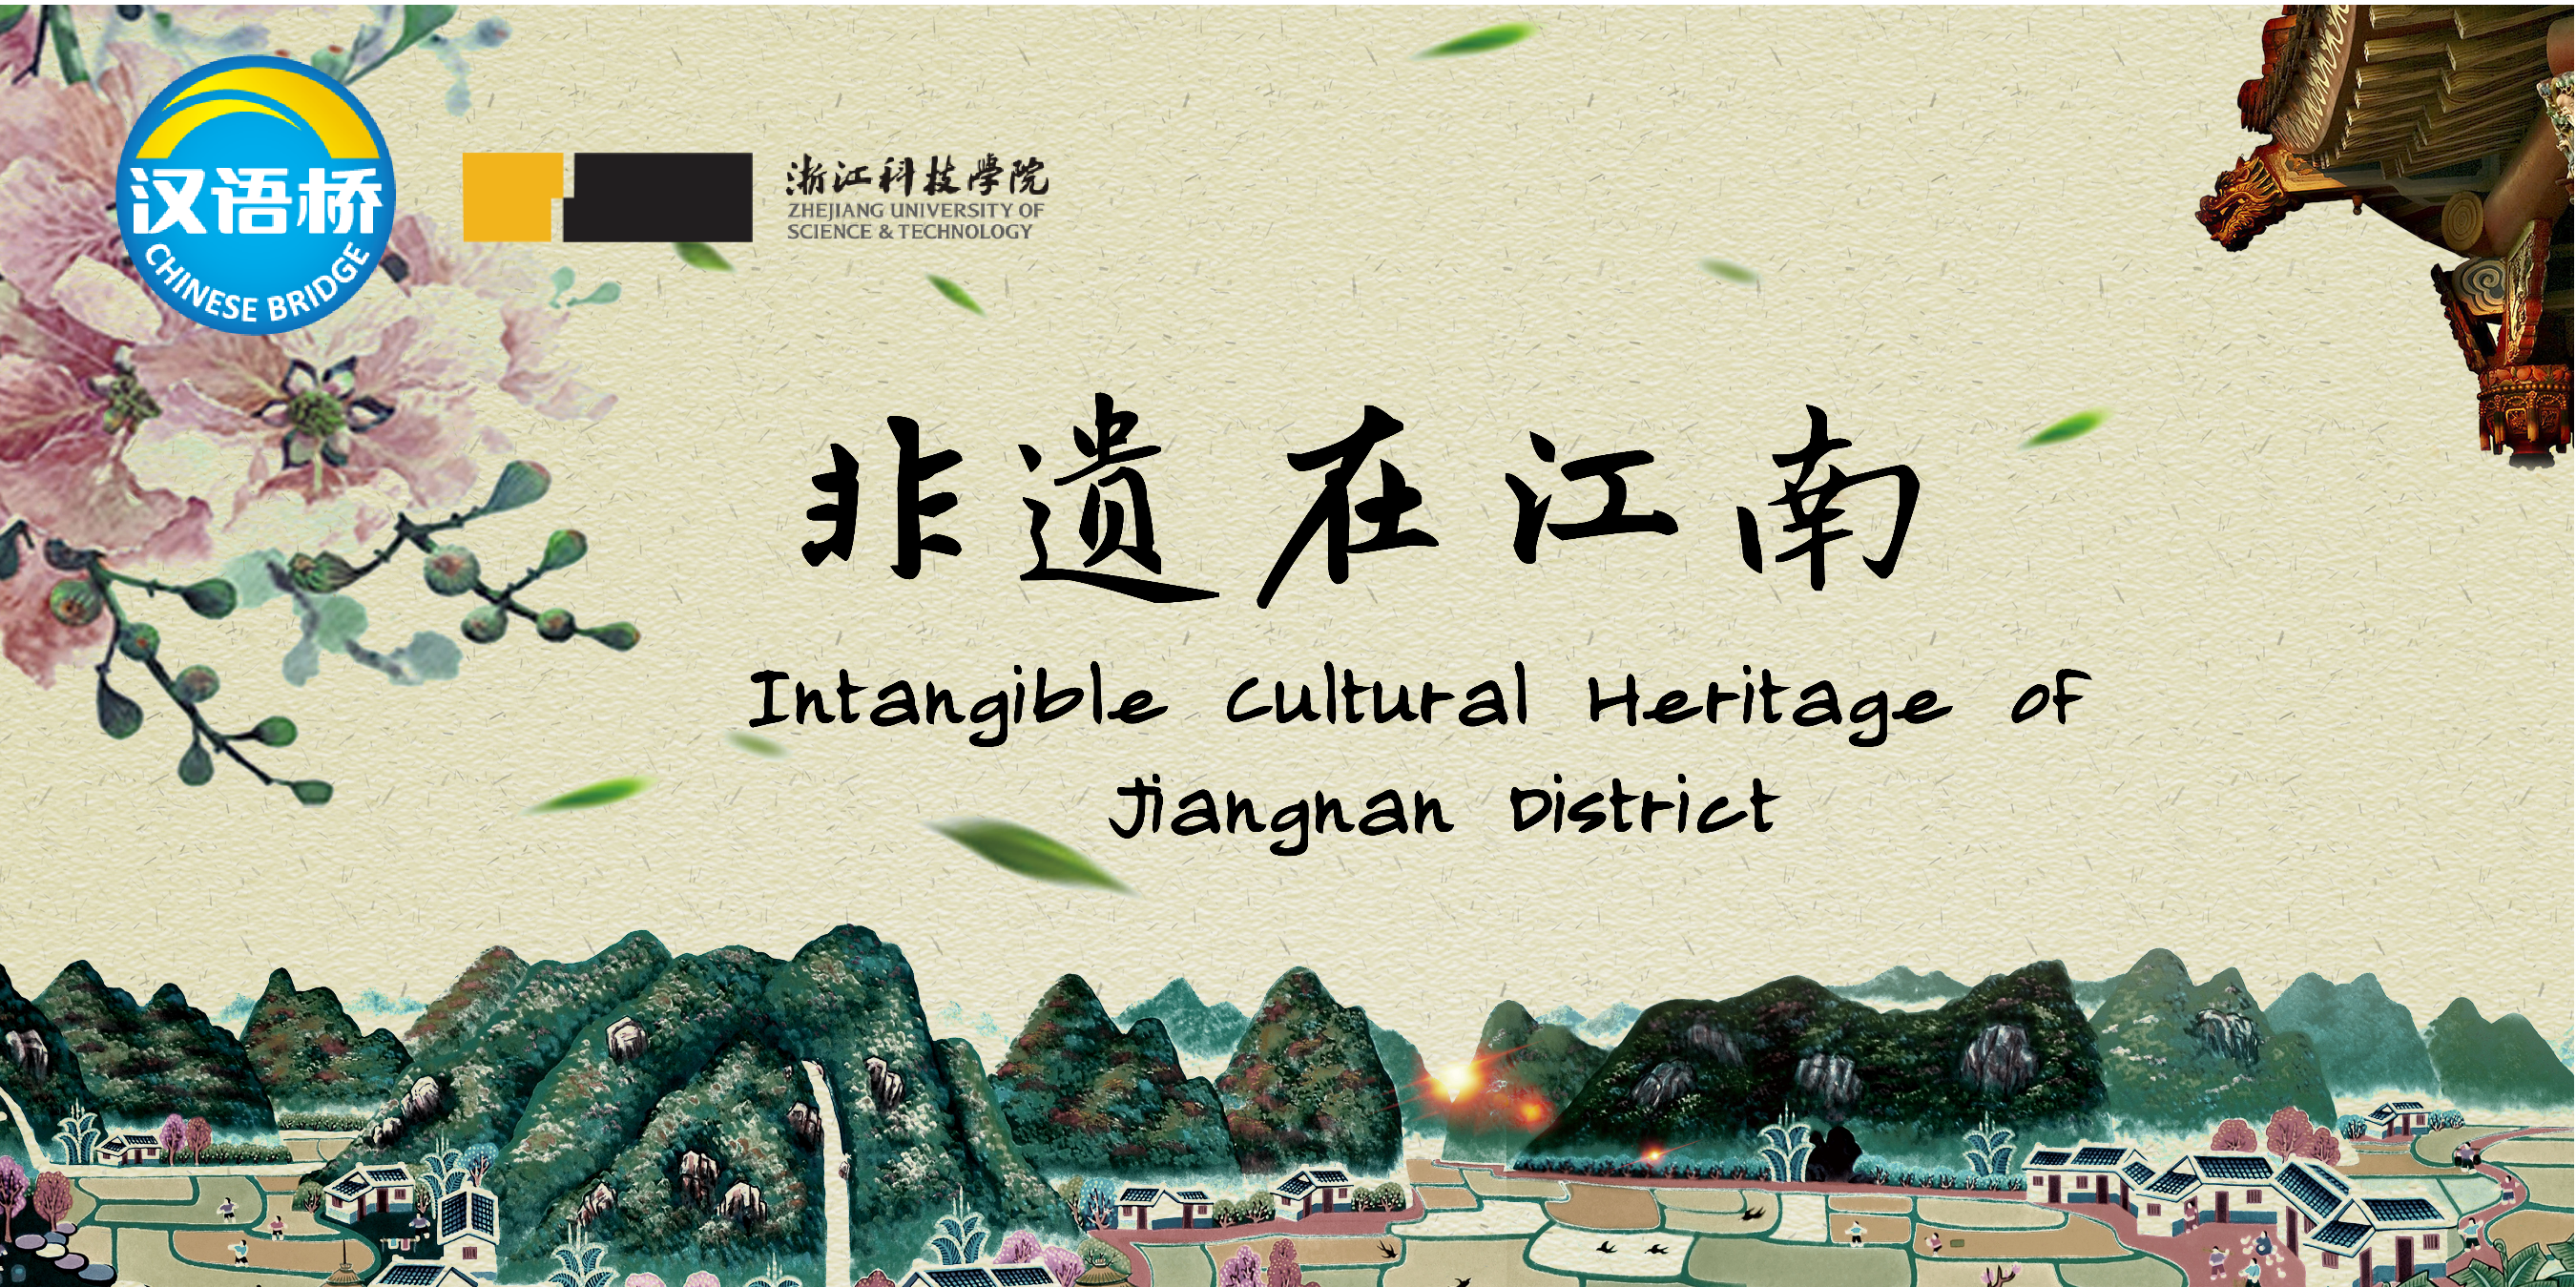 Intangible Cultural Heritage in Jiangnan District